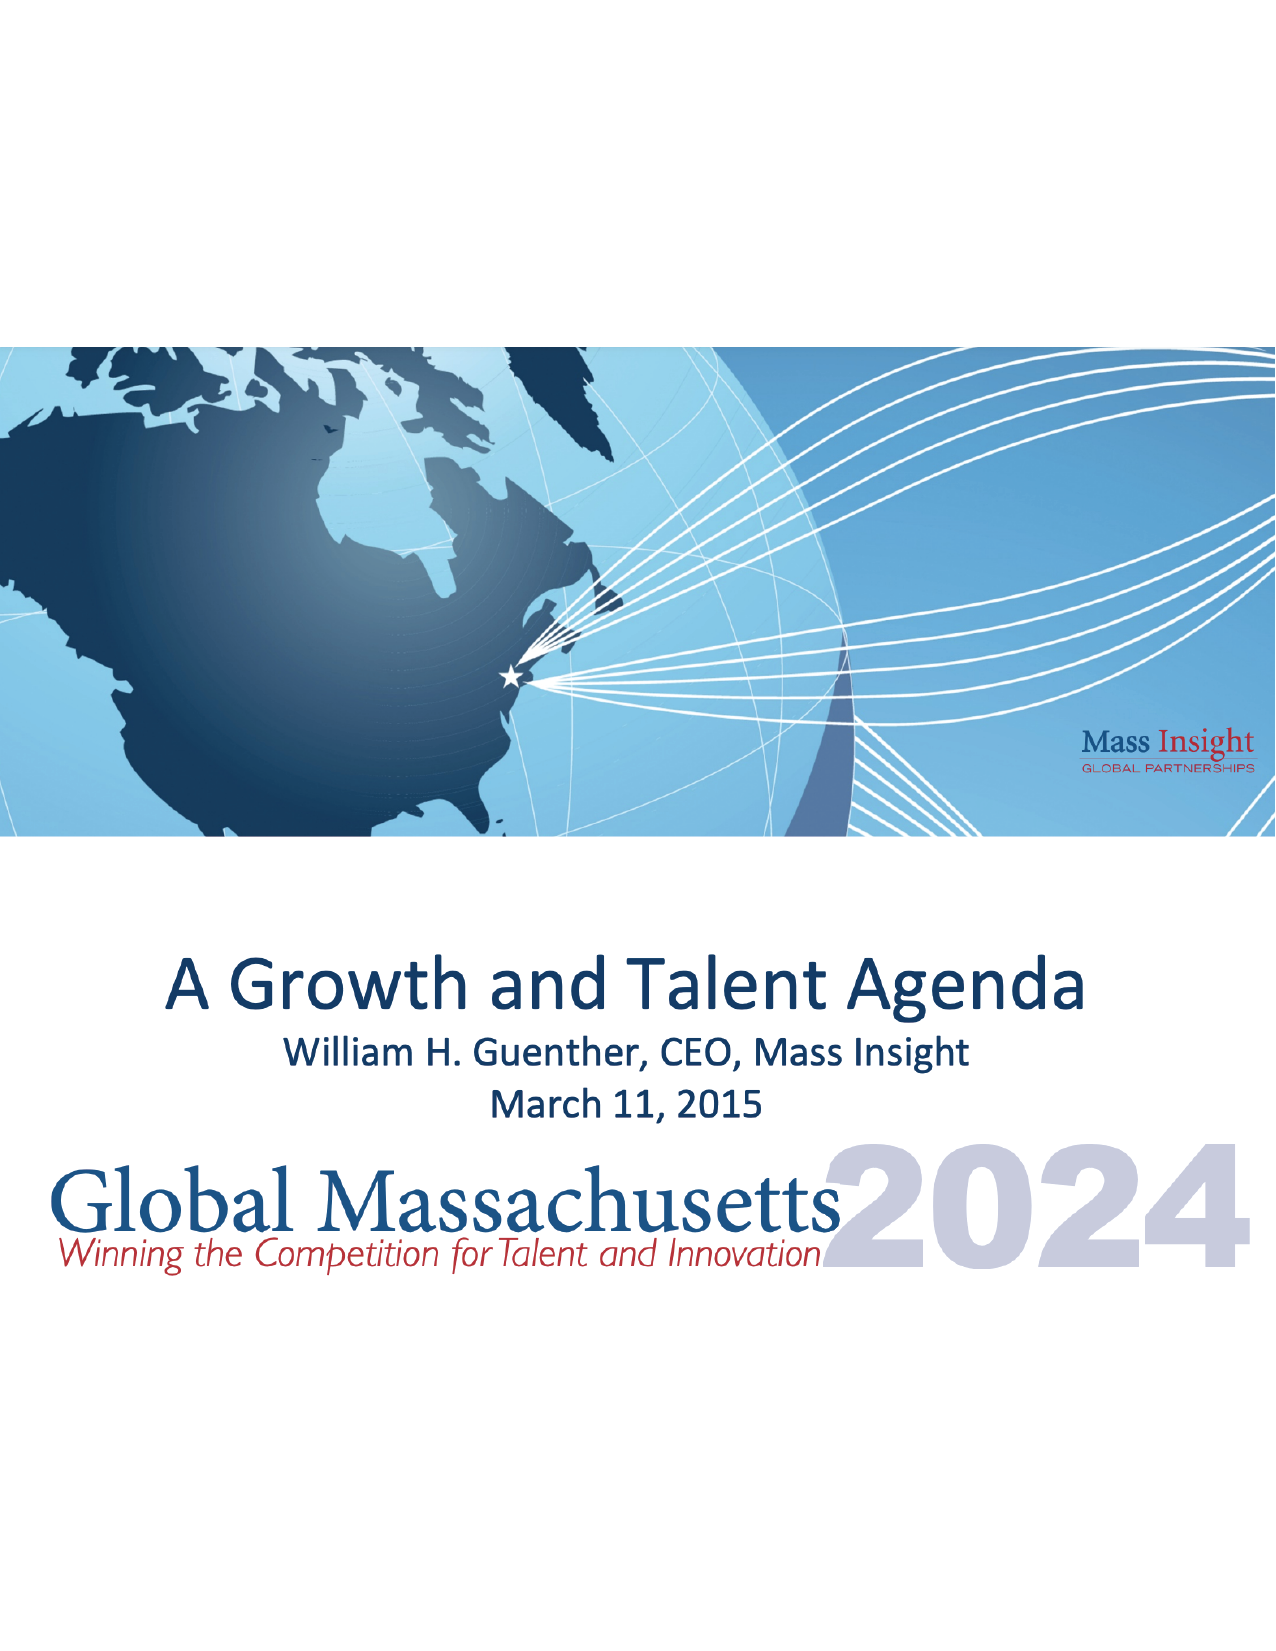 Competition for Talent and Innovation: Regional Growth and Talent Agenda Presentation